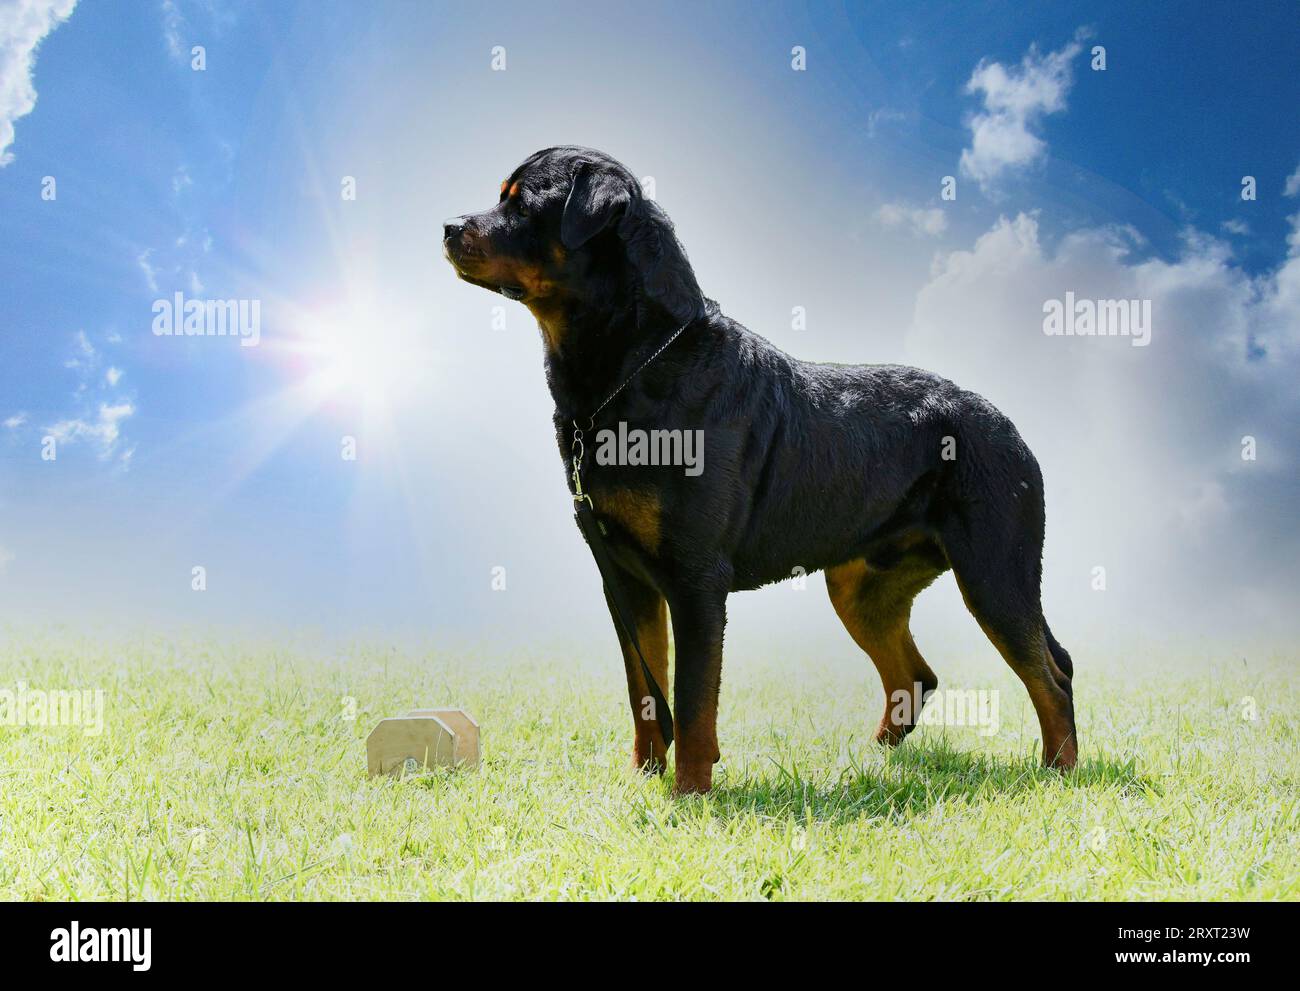 dog training  for obedience discipline with a rottweiler Stock Photo